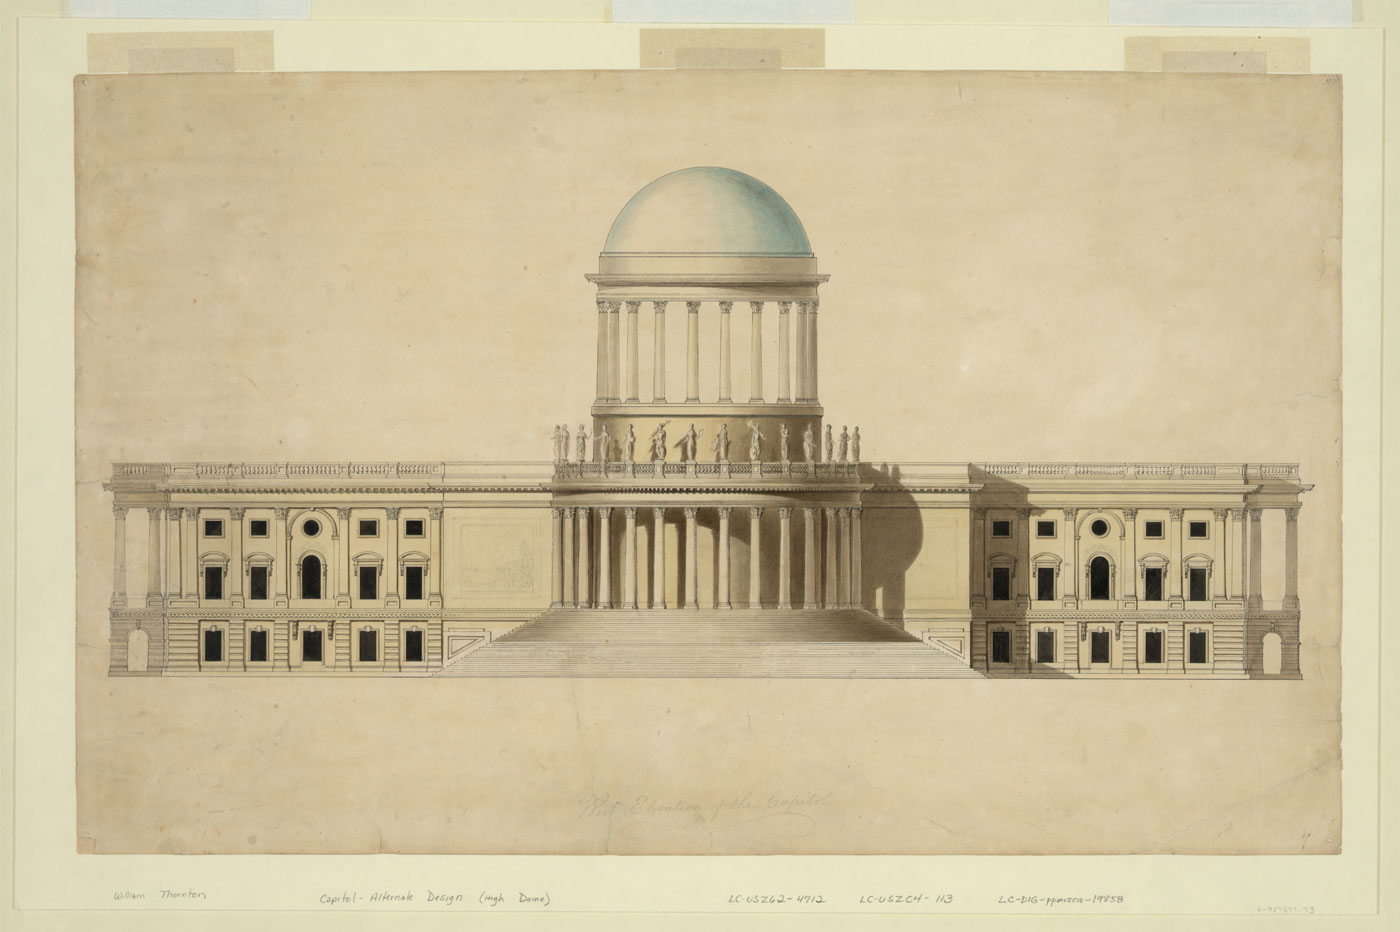 Proposed design for the US Capitol with high dome by William Thornton, c. 1797. Library of Congress, Prints and Photographs Division, LC-DIG-ppmsca-19858.